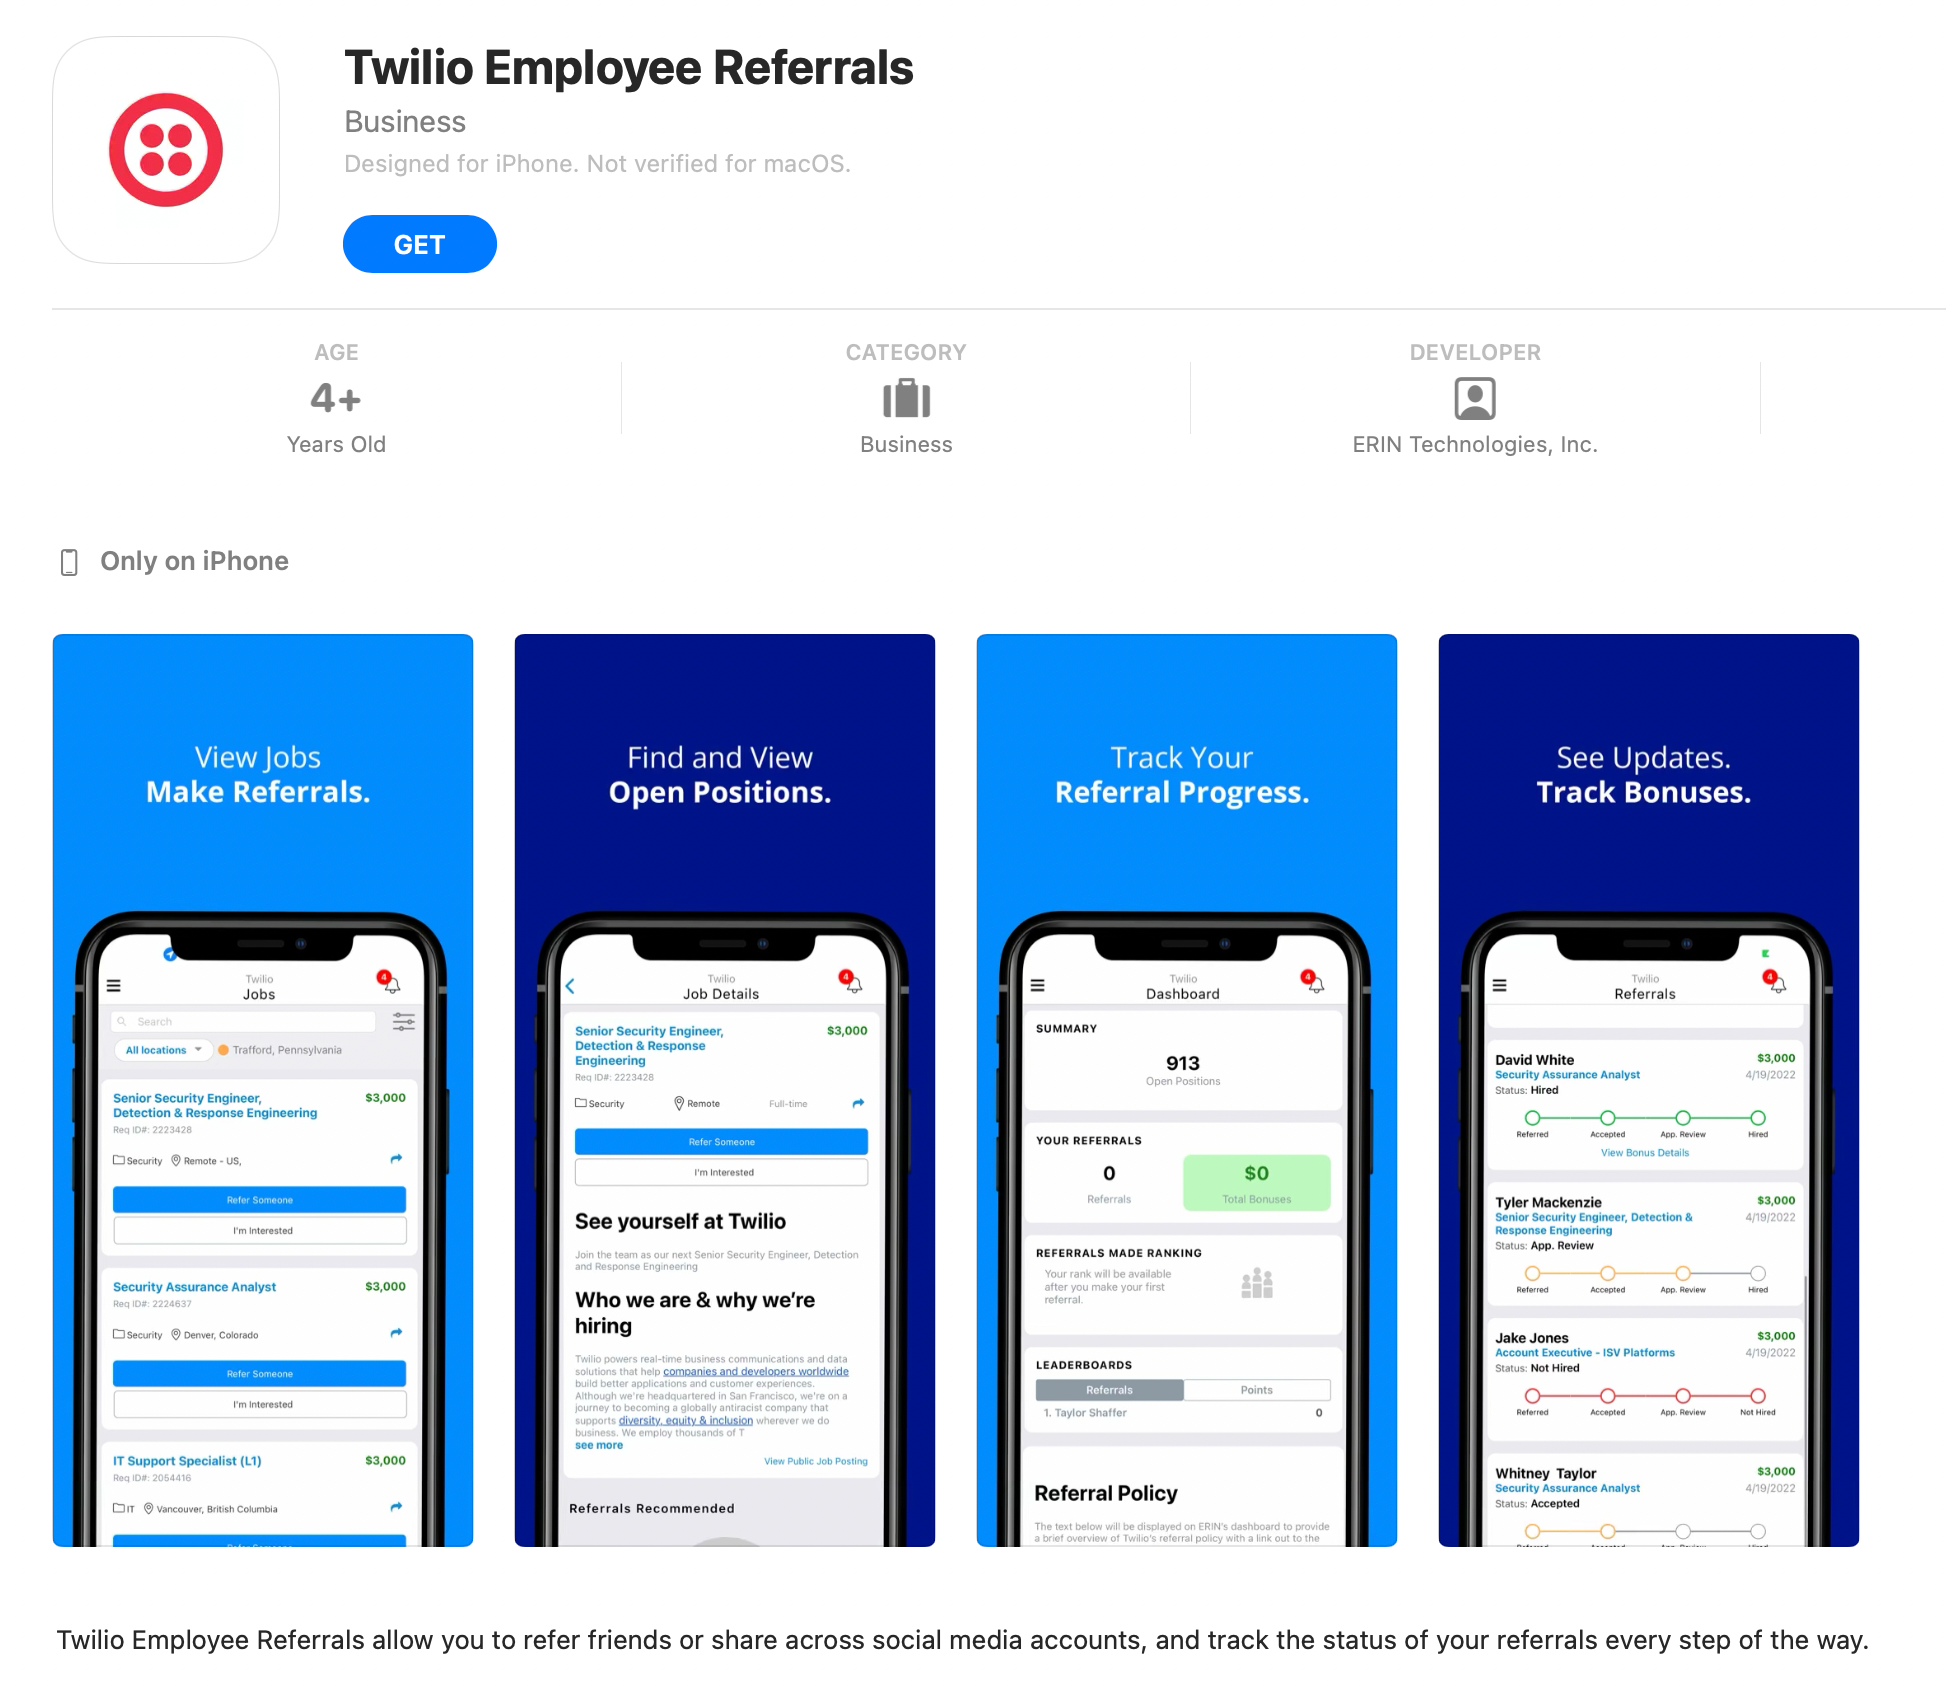 Ensure your process is quick and easy for your employees to ensure successful referrals. Twilio even created their own app to easily track employee referrals and distribute referral bonuses. 